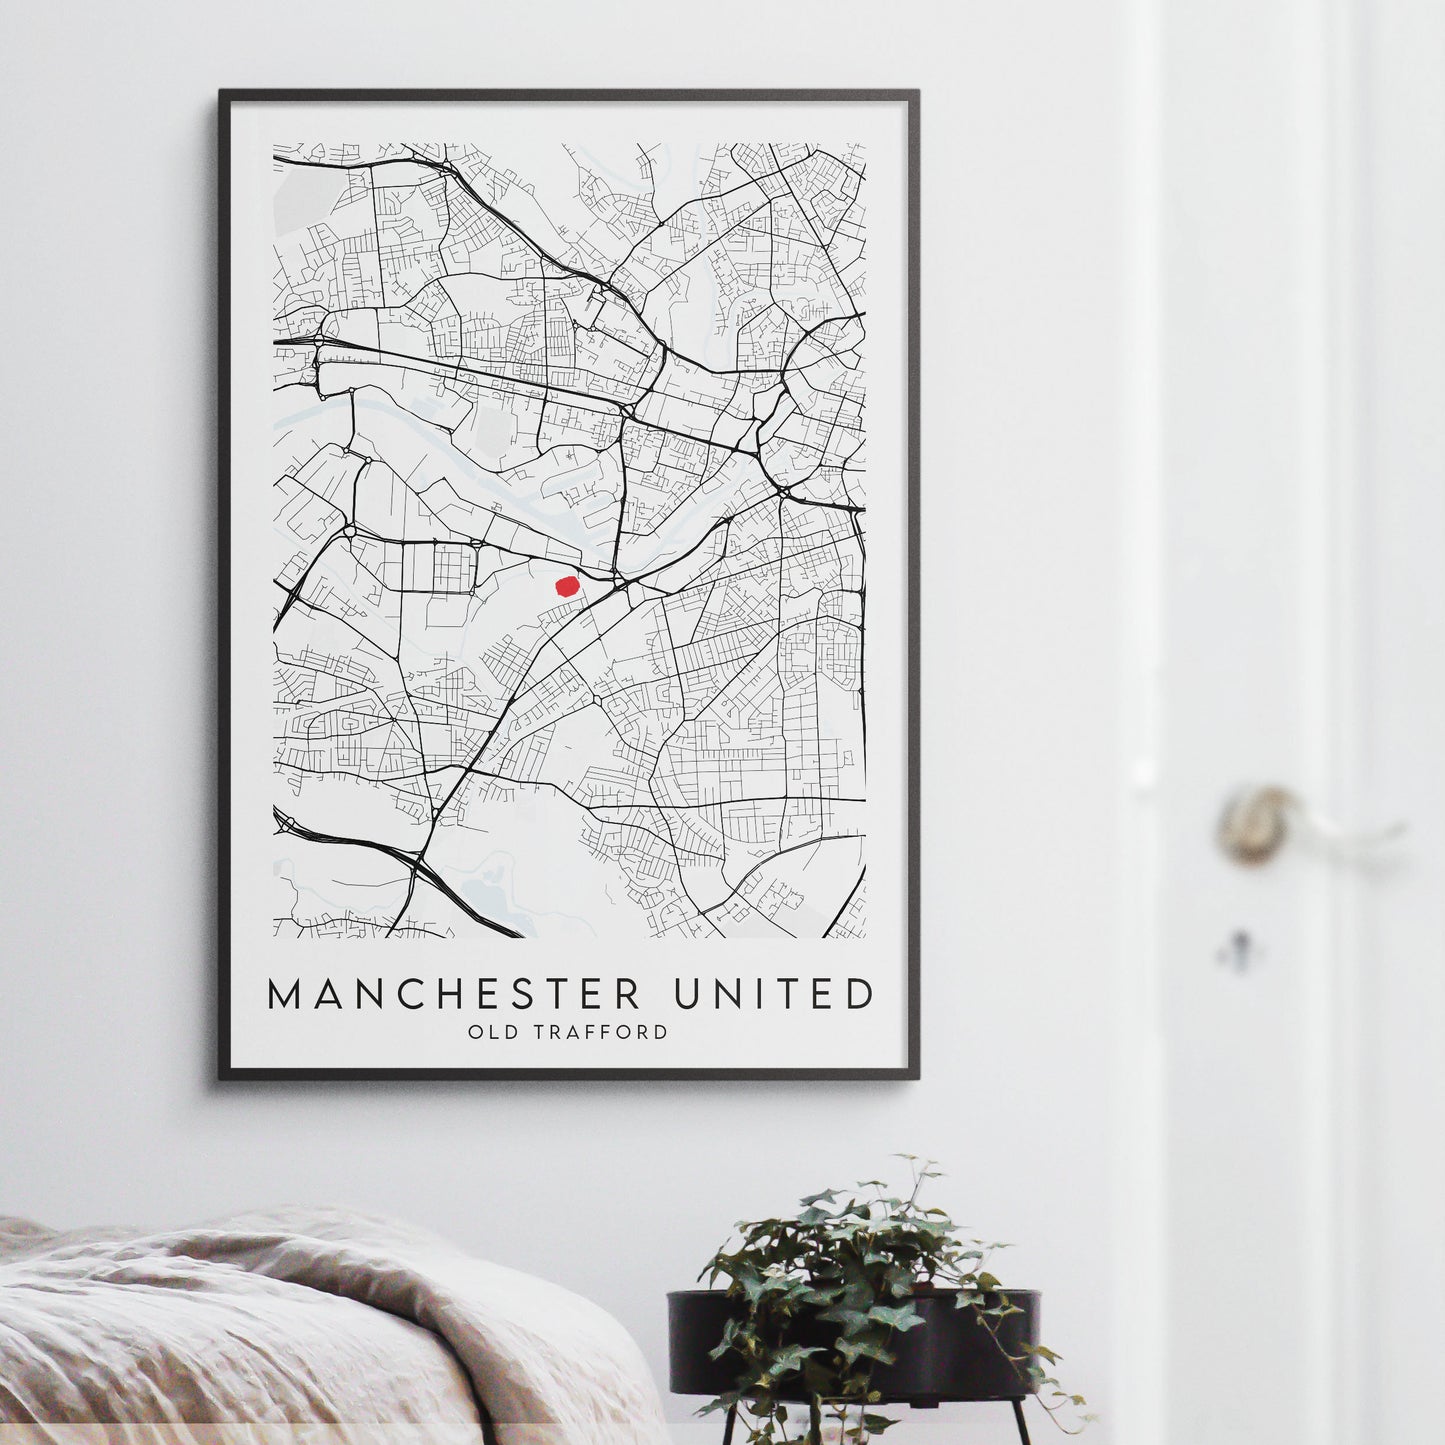 Manchester United Poster - Old Trafford Stadium Football Map